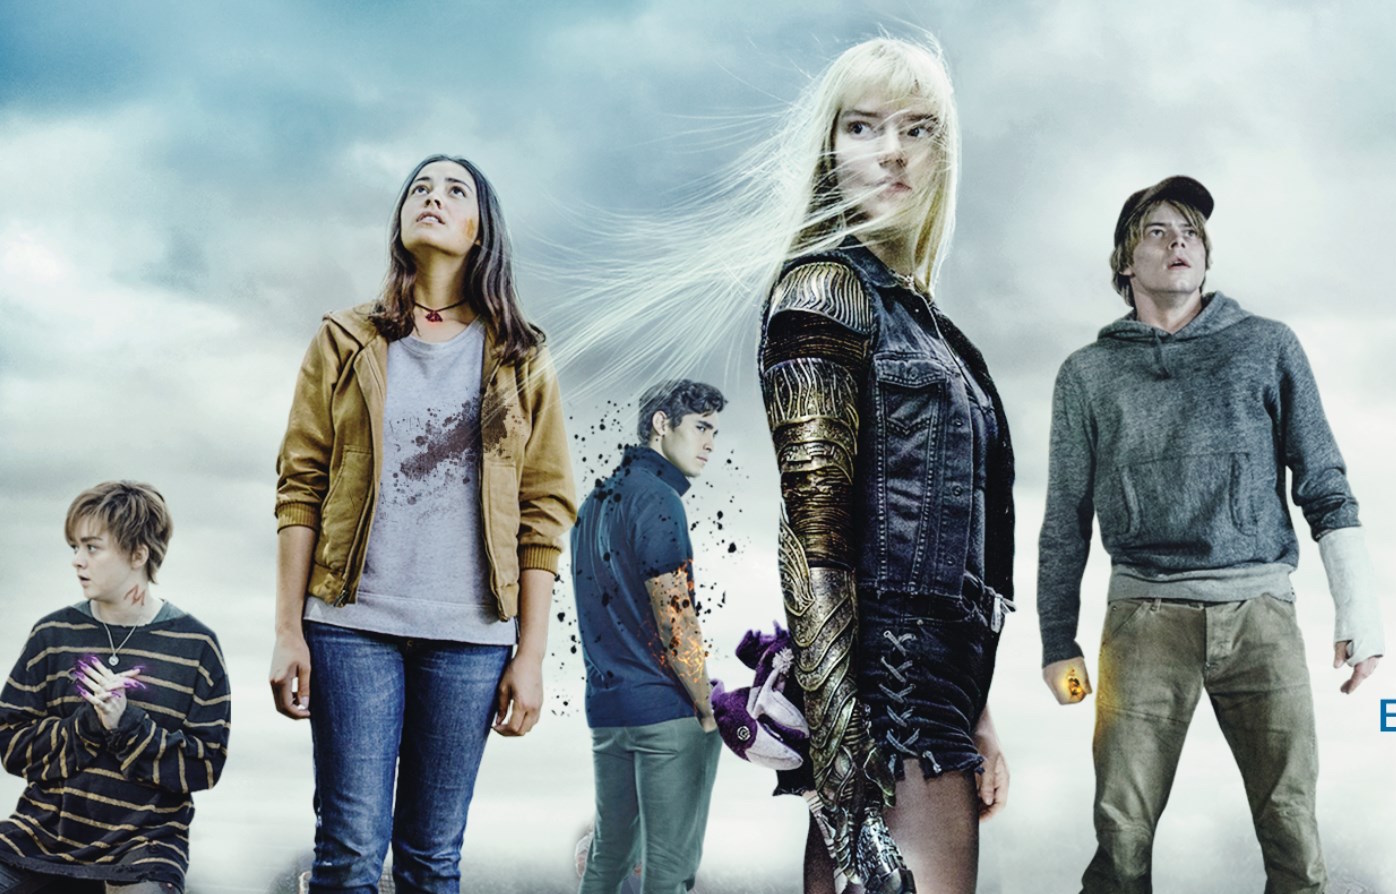 The New Mutants and Its Nightmare on Elm Street Influences